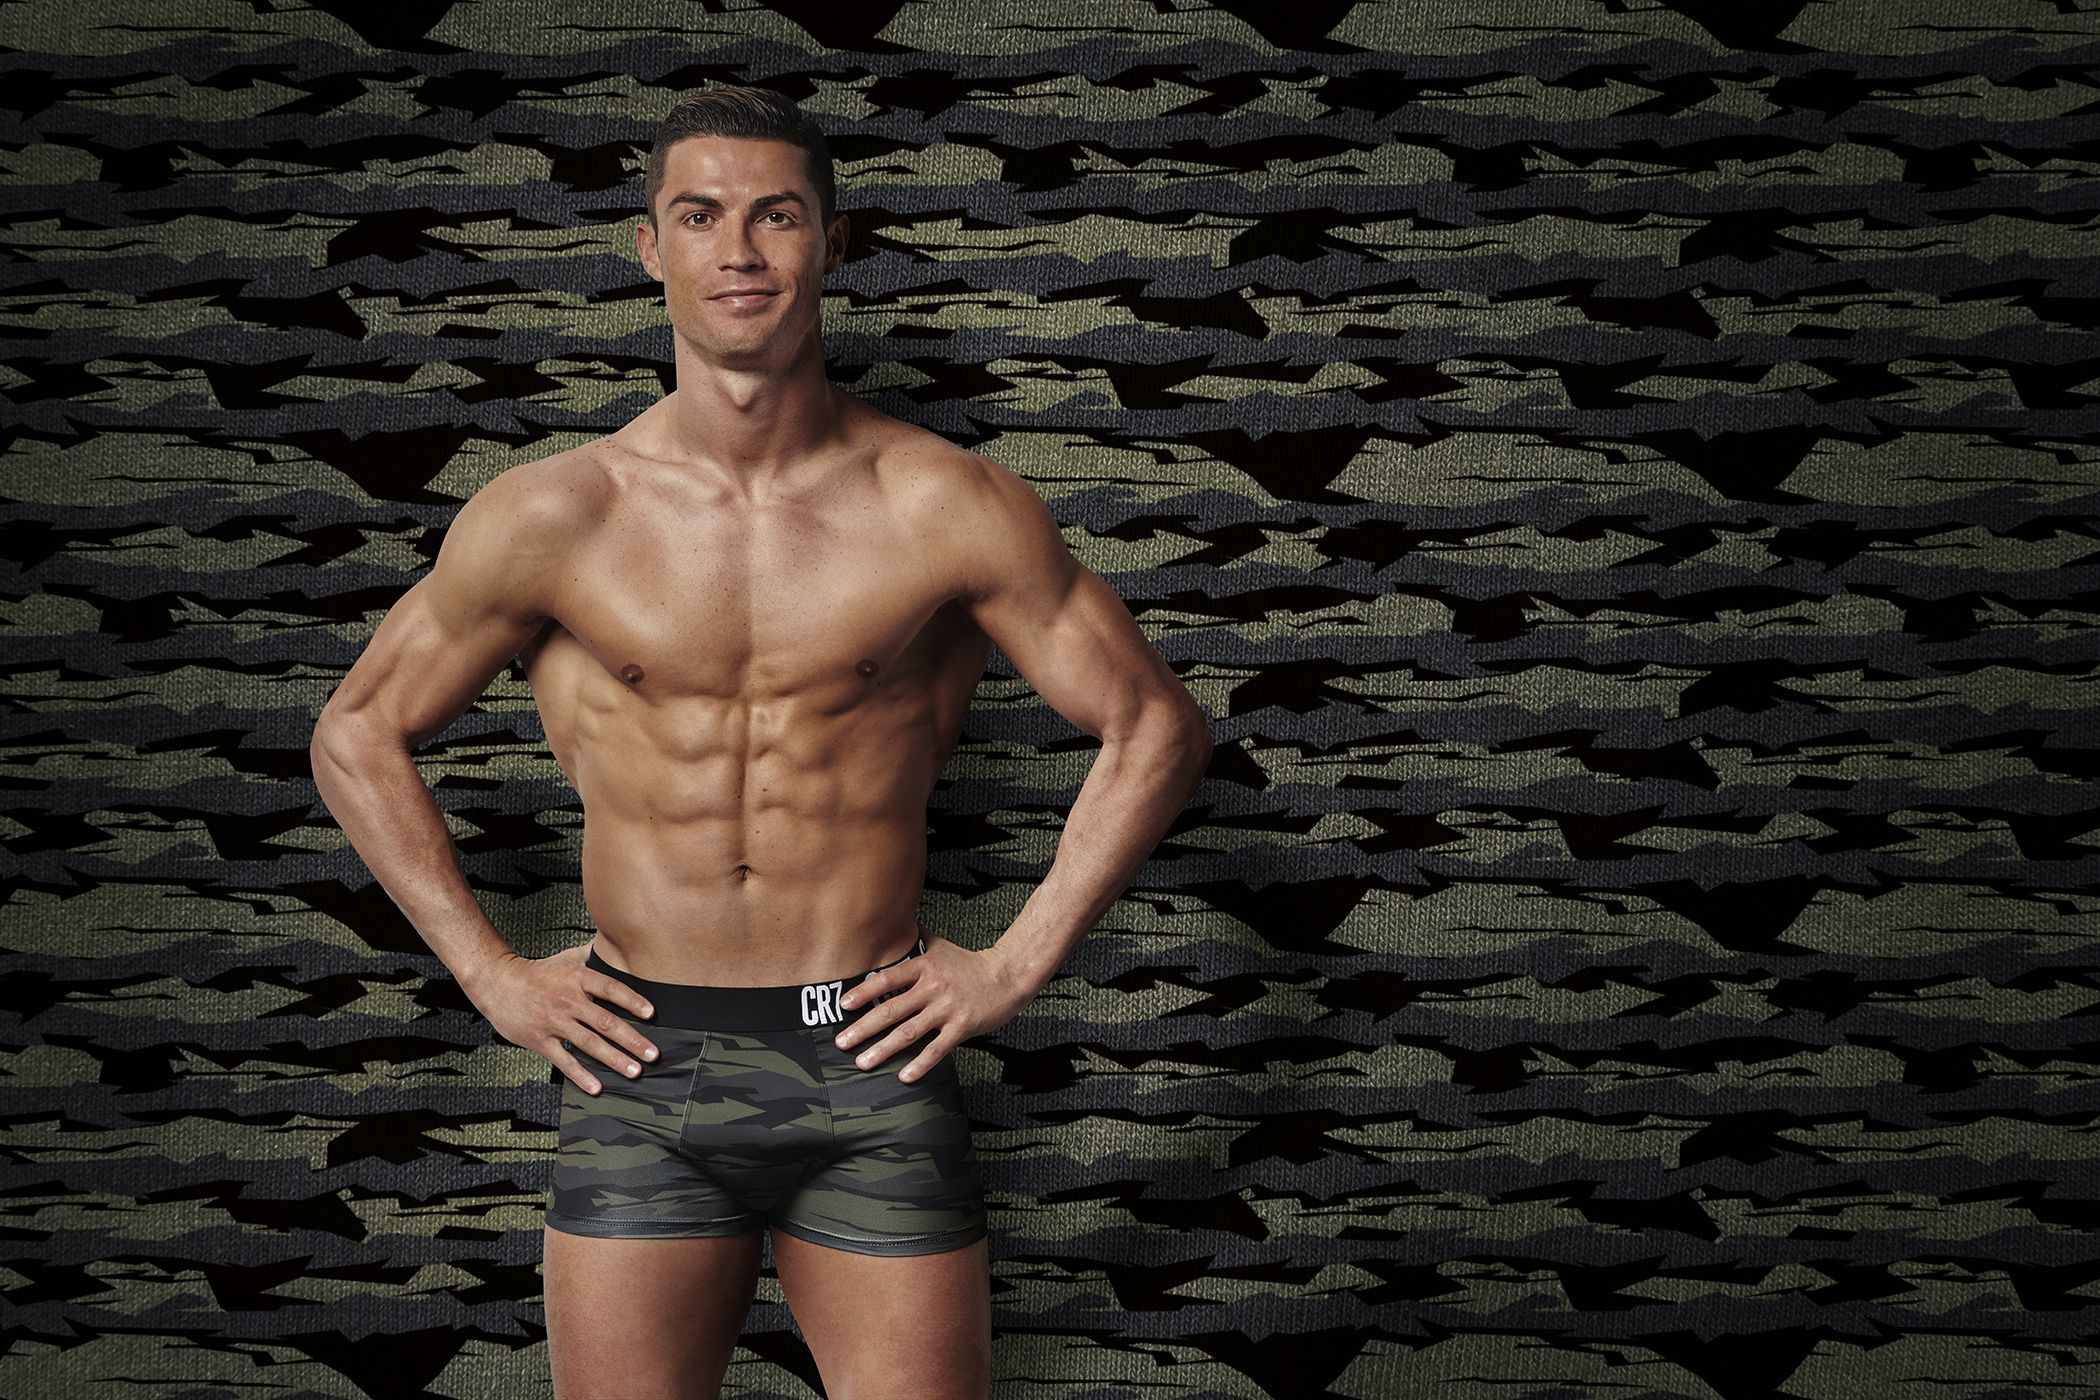 Cristiano Ronaldo Is Trying to Hide His Junk From You